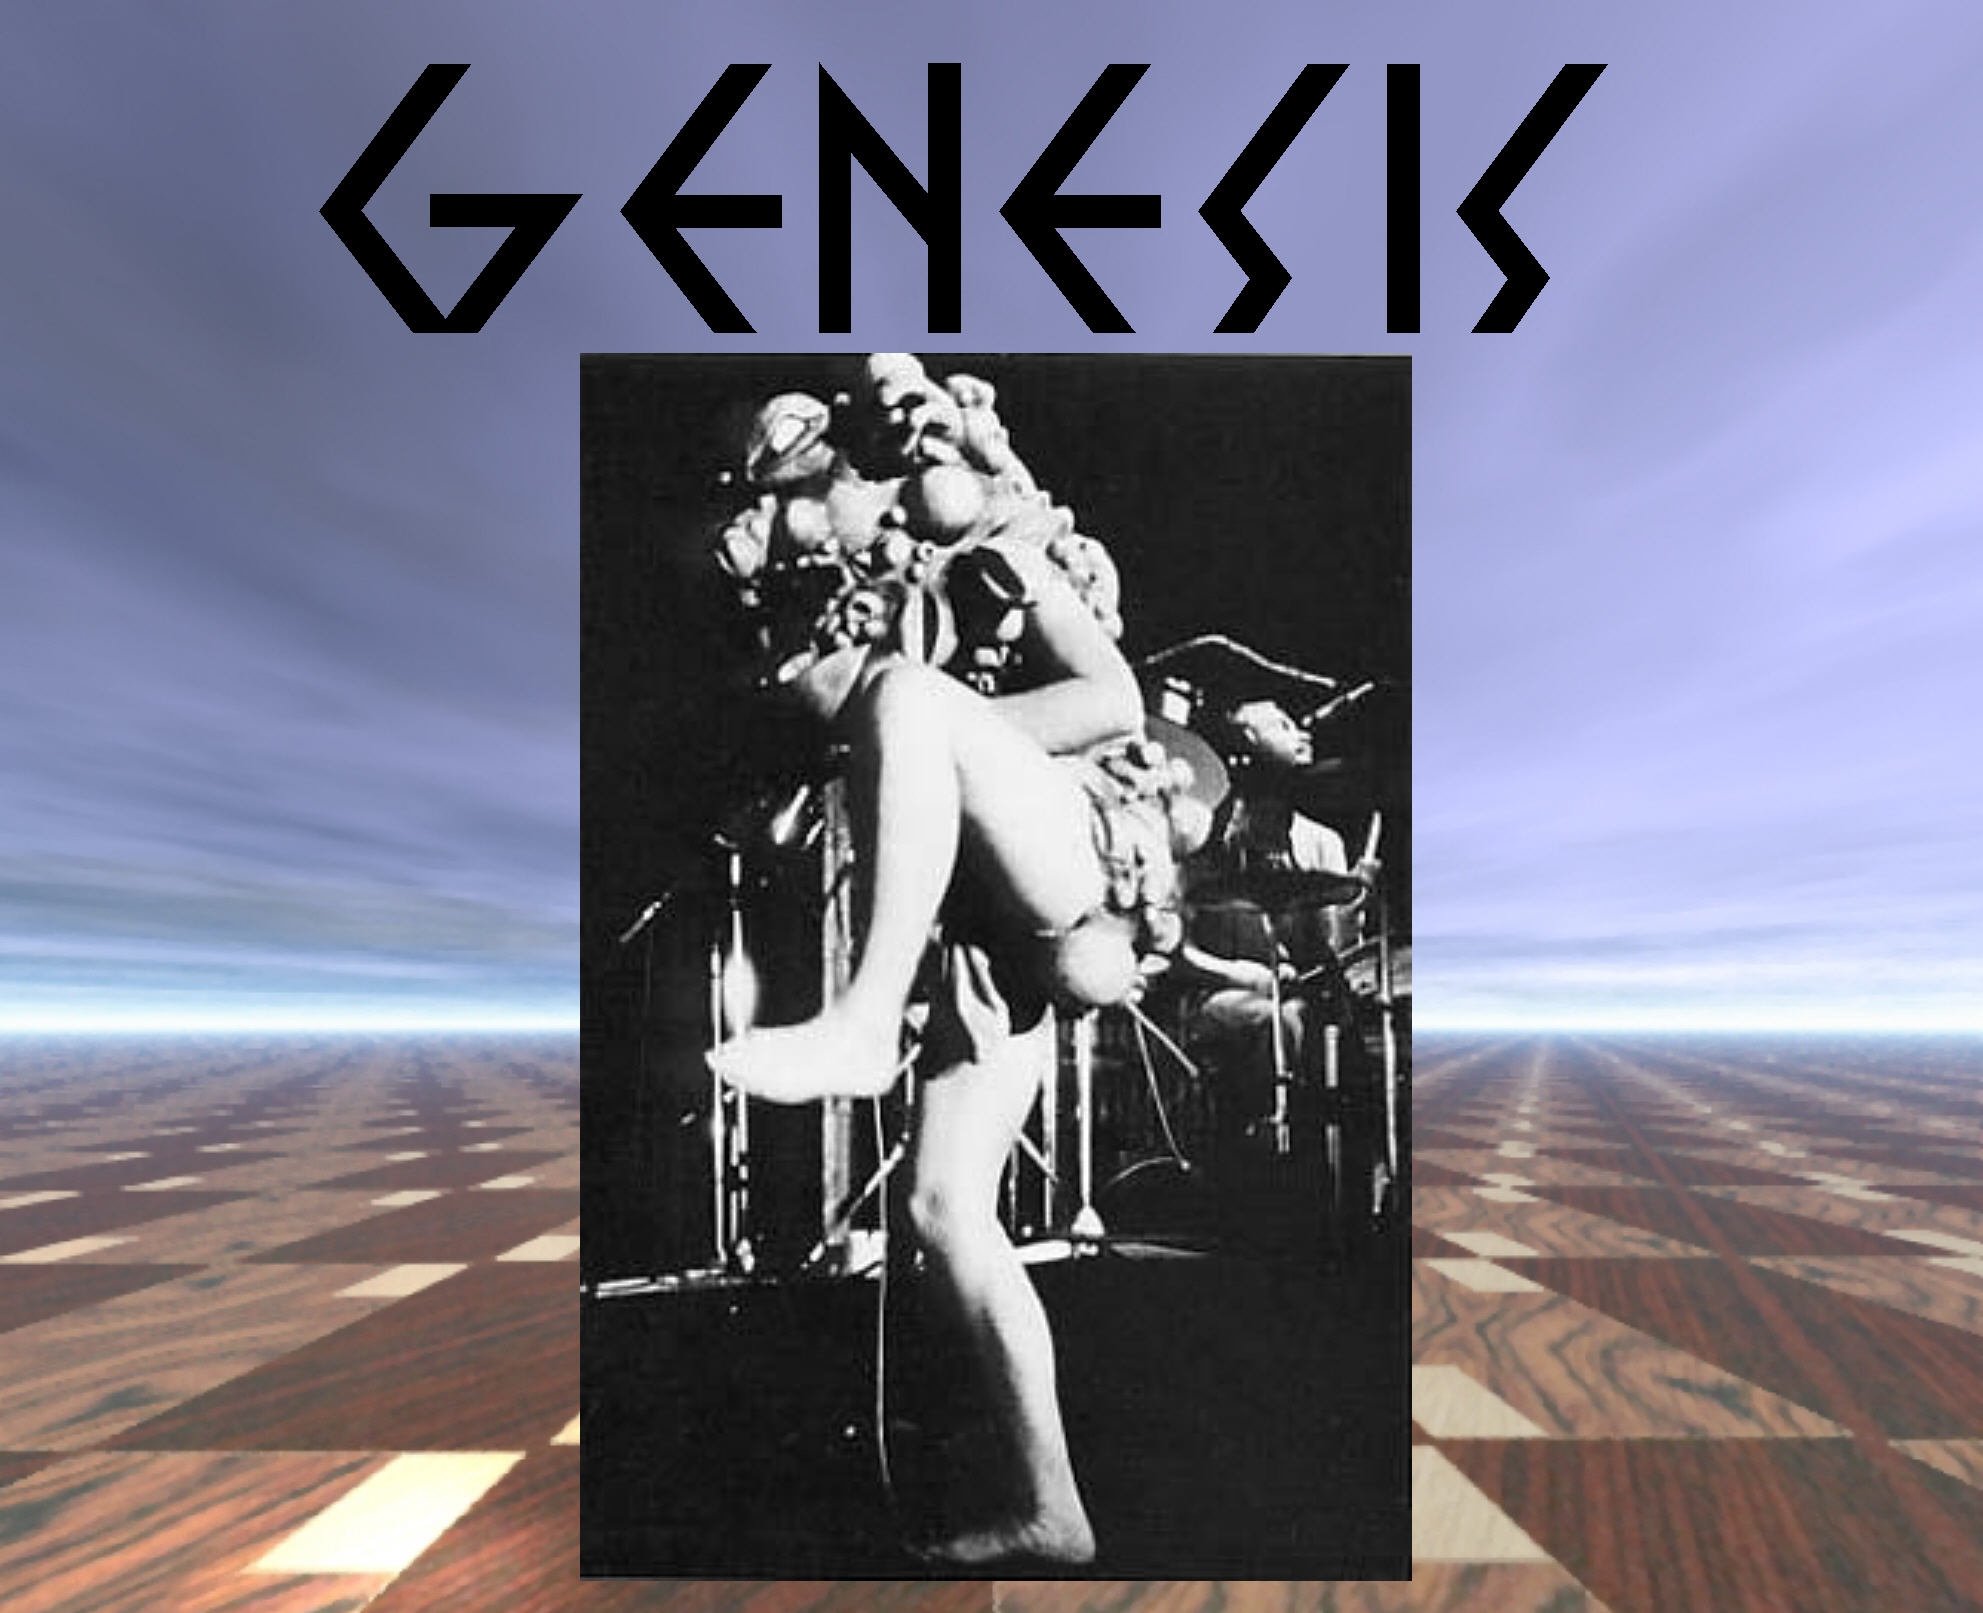 genesis-those-concerts-deleted-of-1974